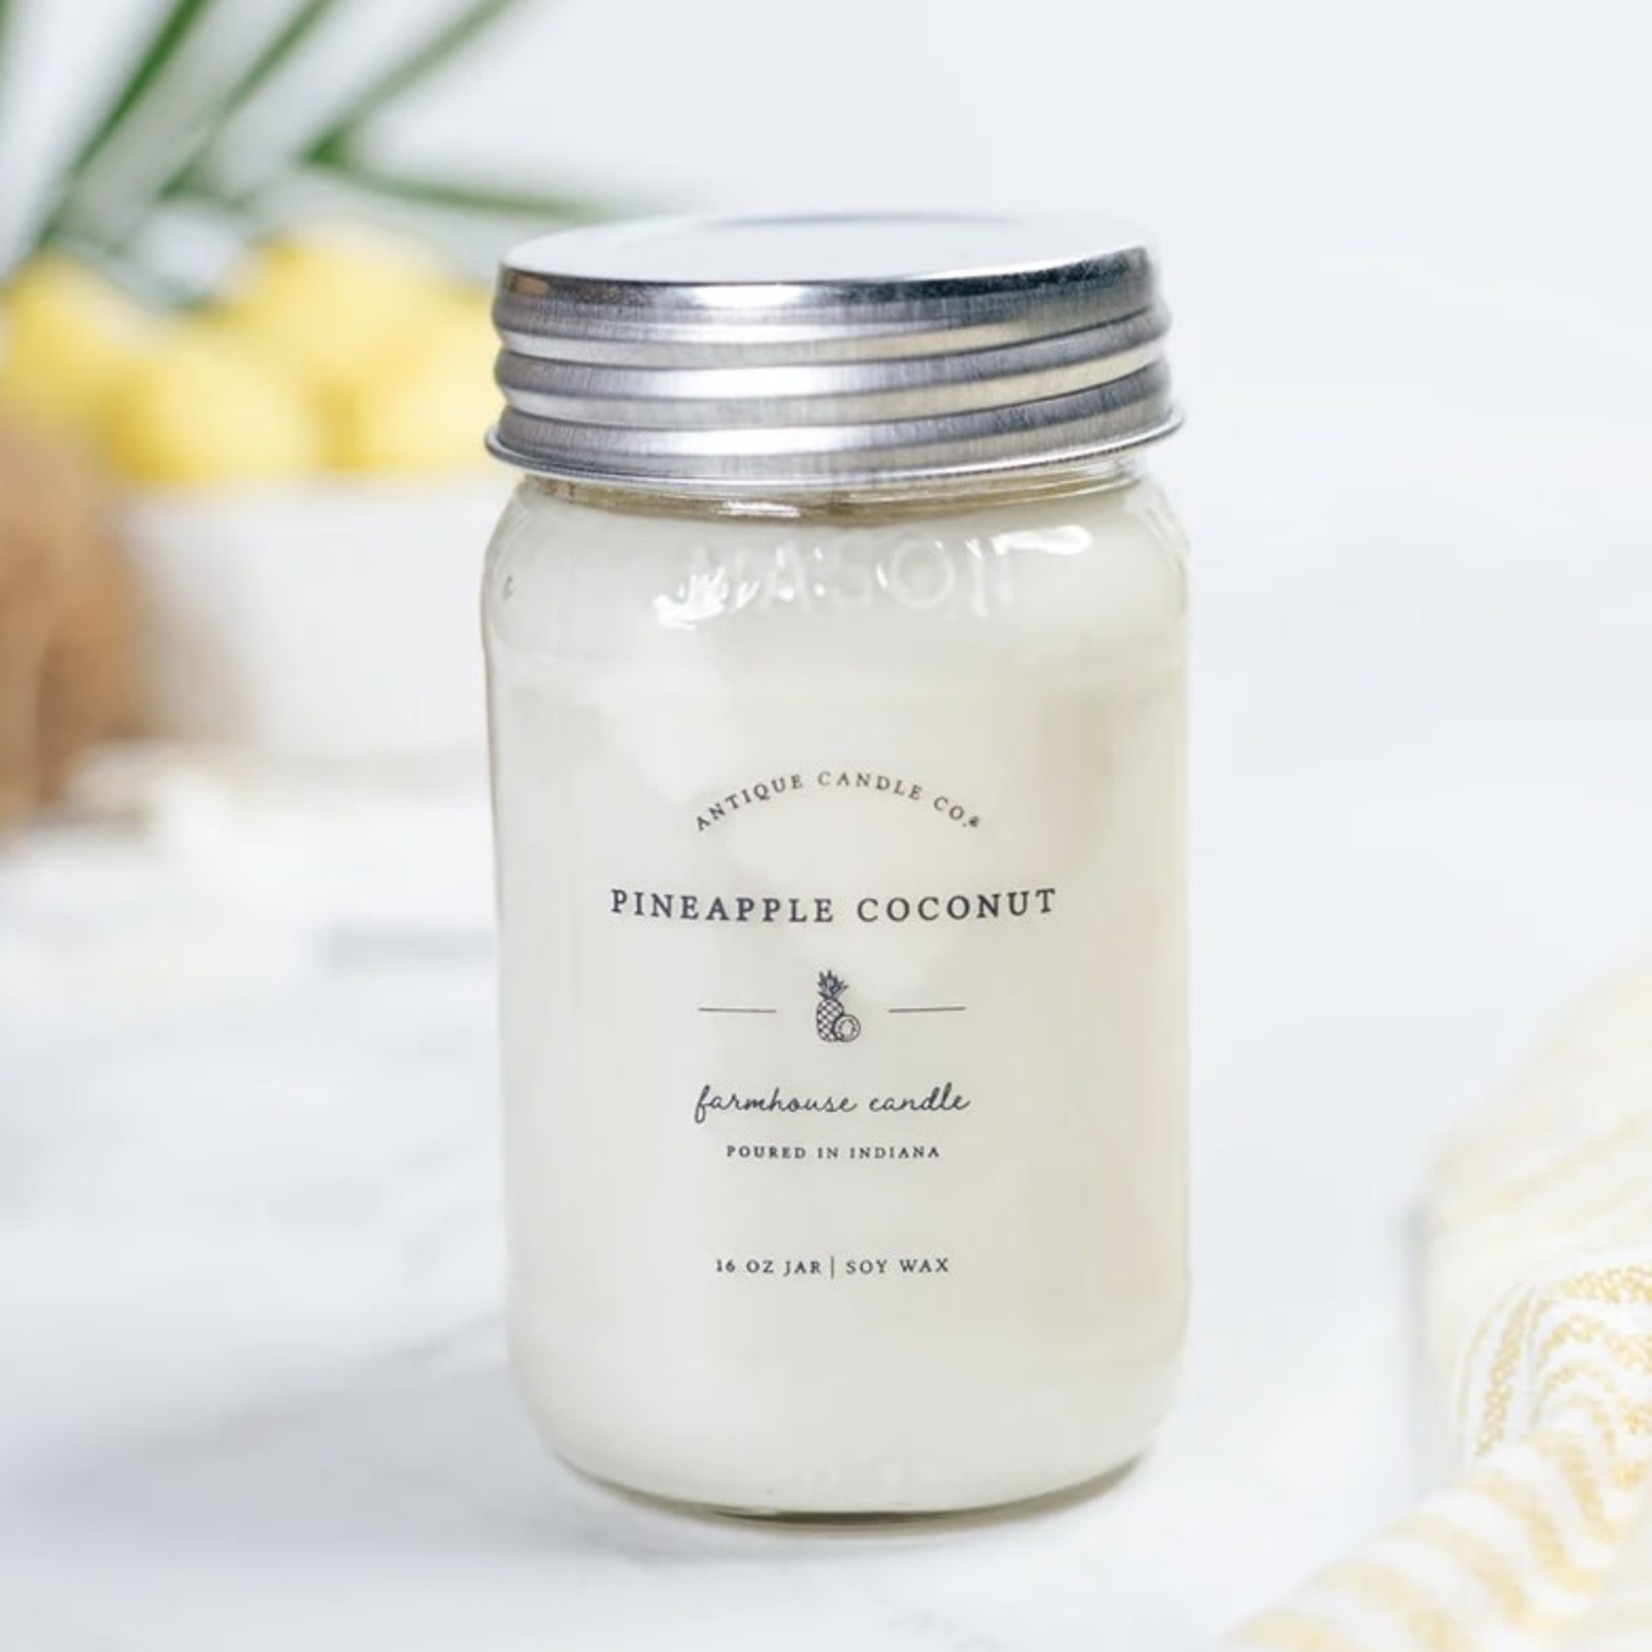 Antique Candle Co. Pineapple Coconut by Antique Candle Co.  /  16 oz